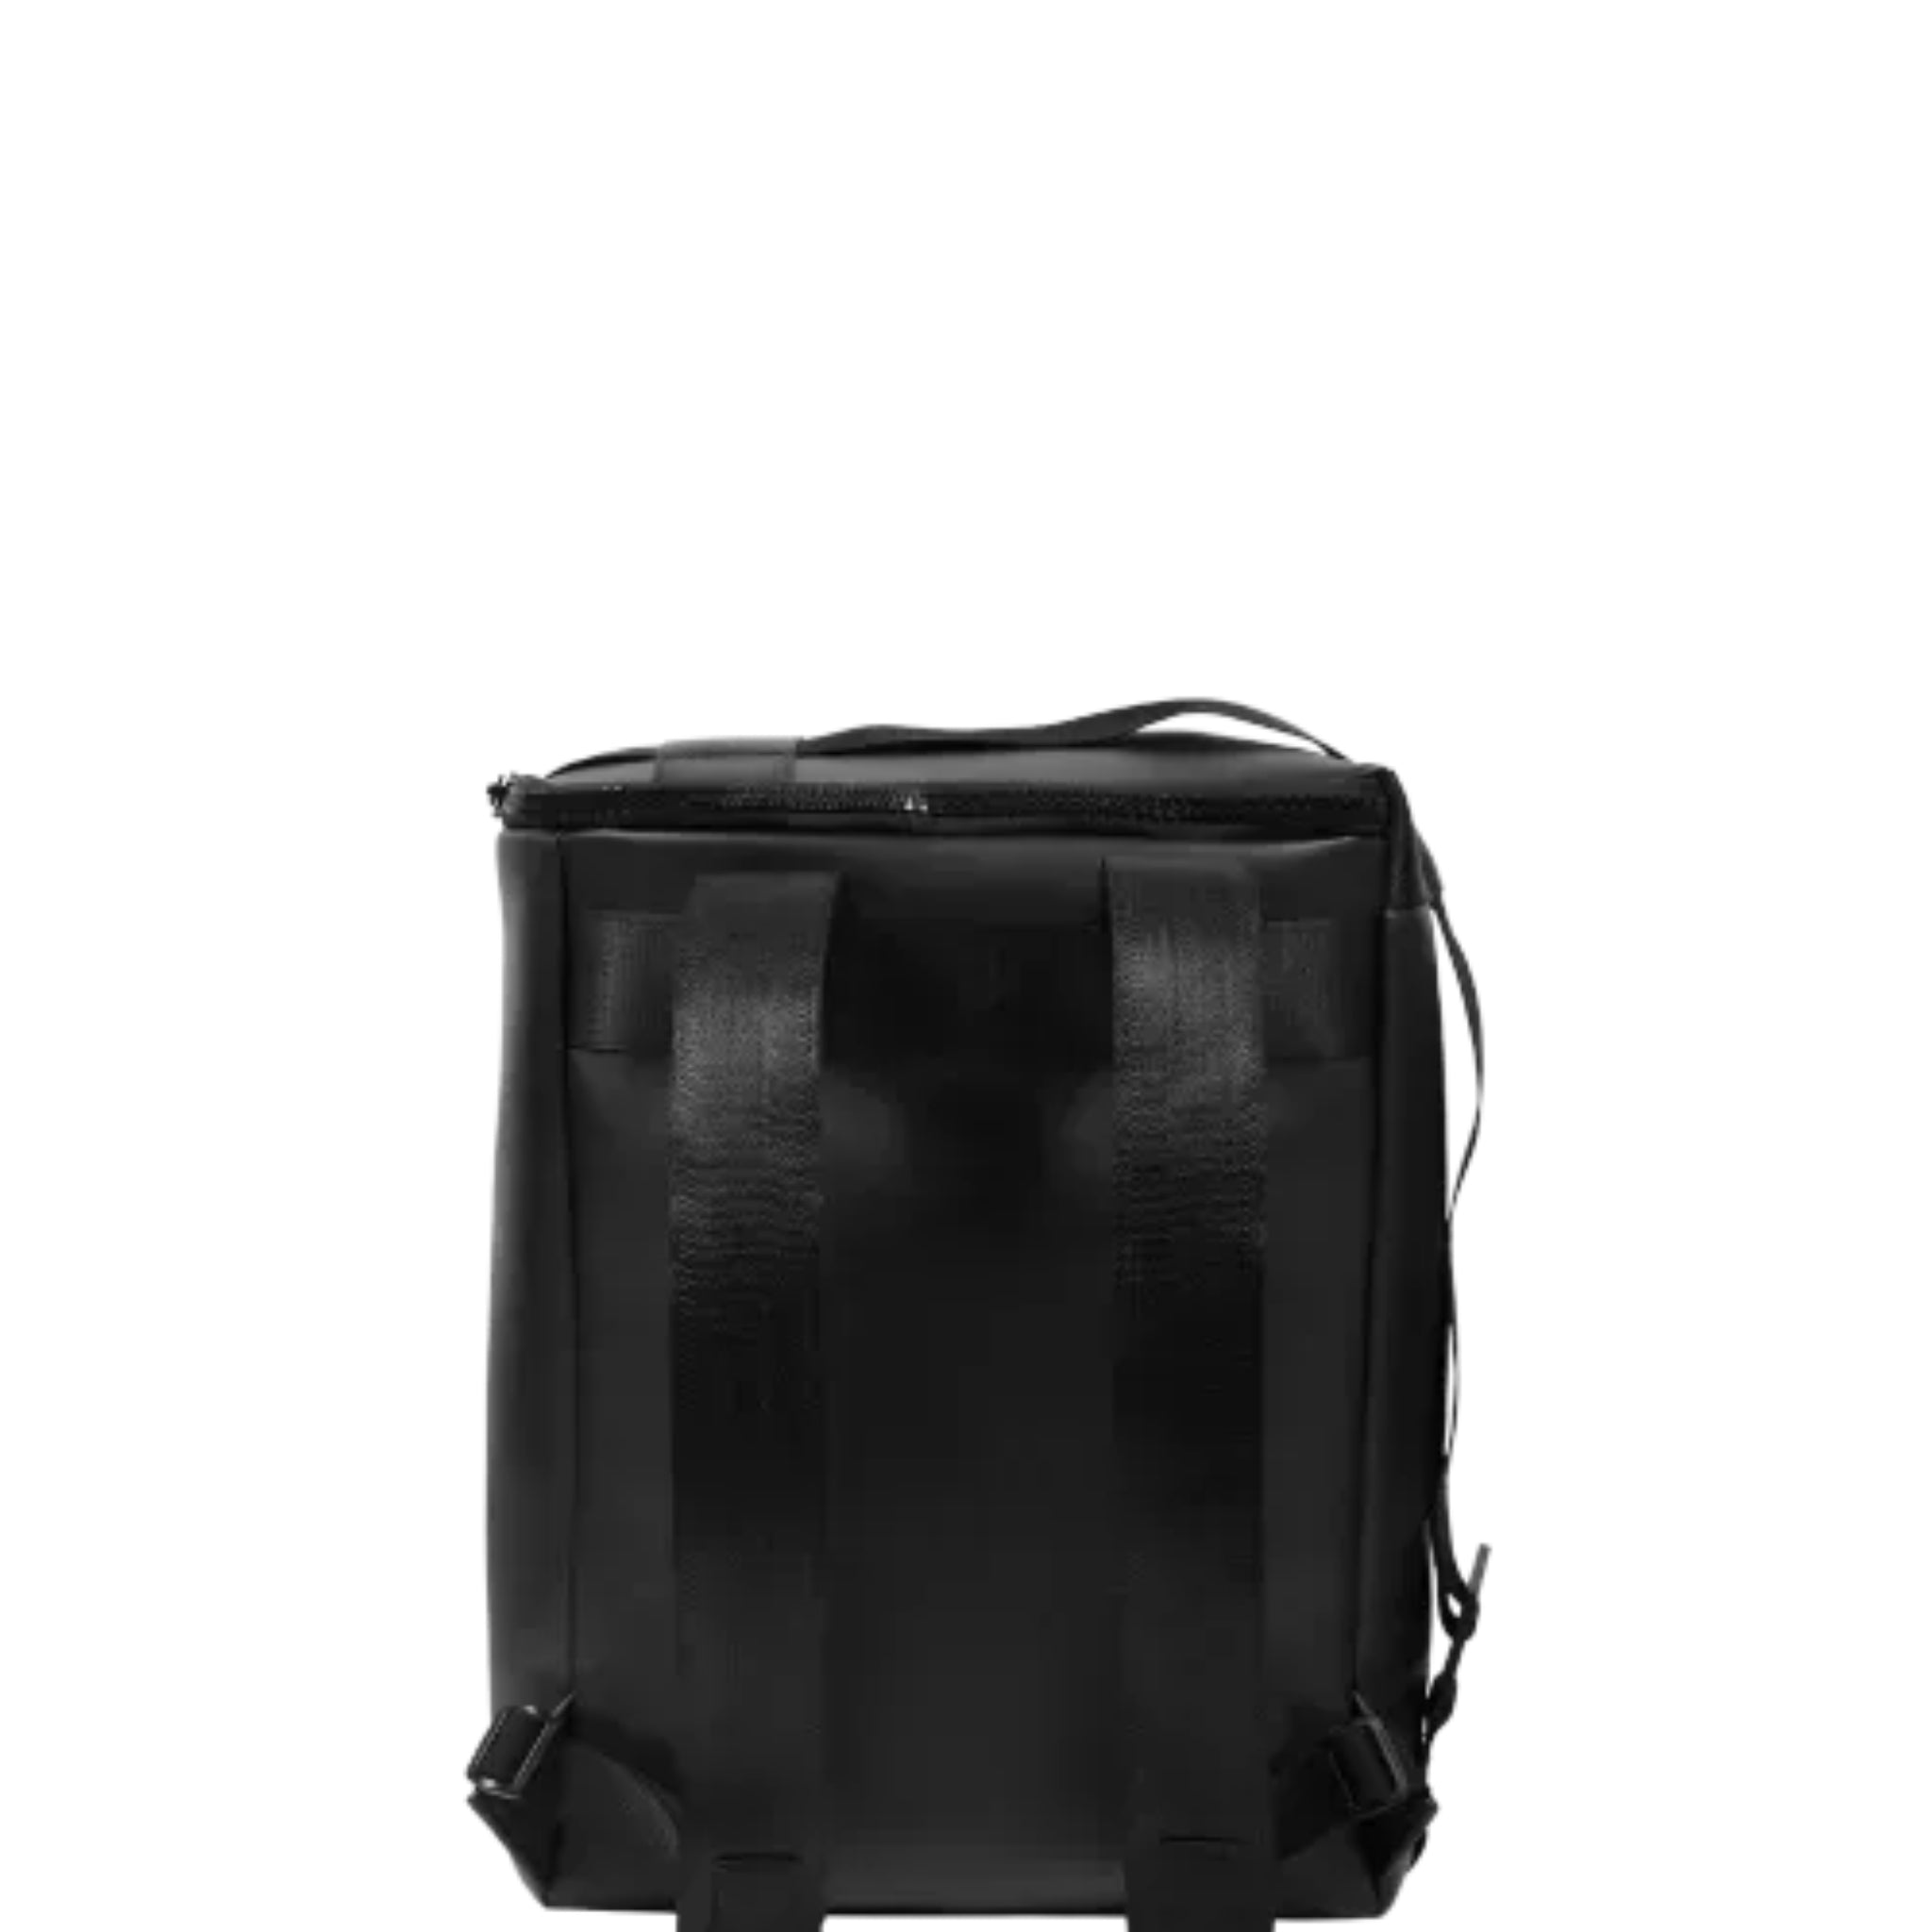 the back of an Interesting rectangular shaped backpack in black vegan leather material (Desserto) on a white background.